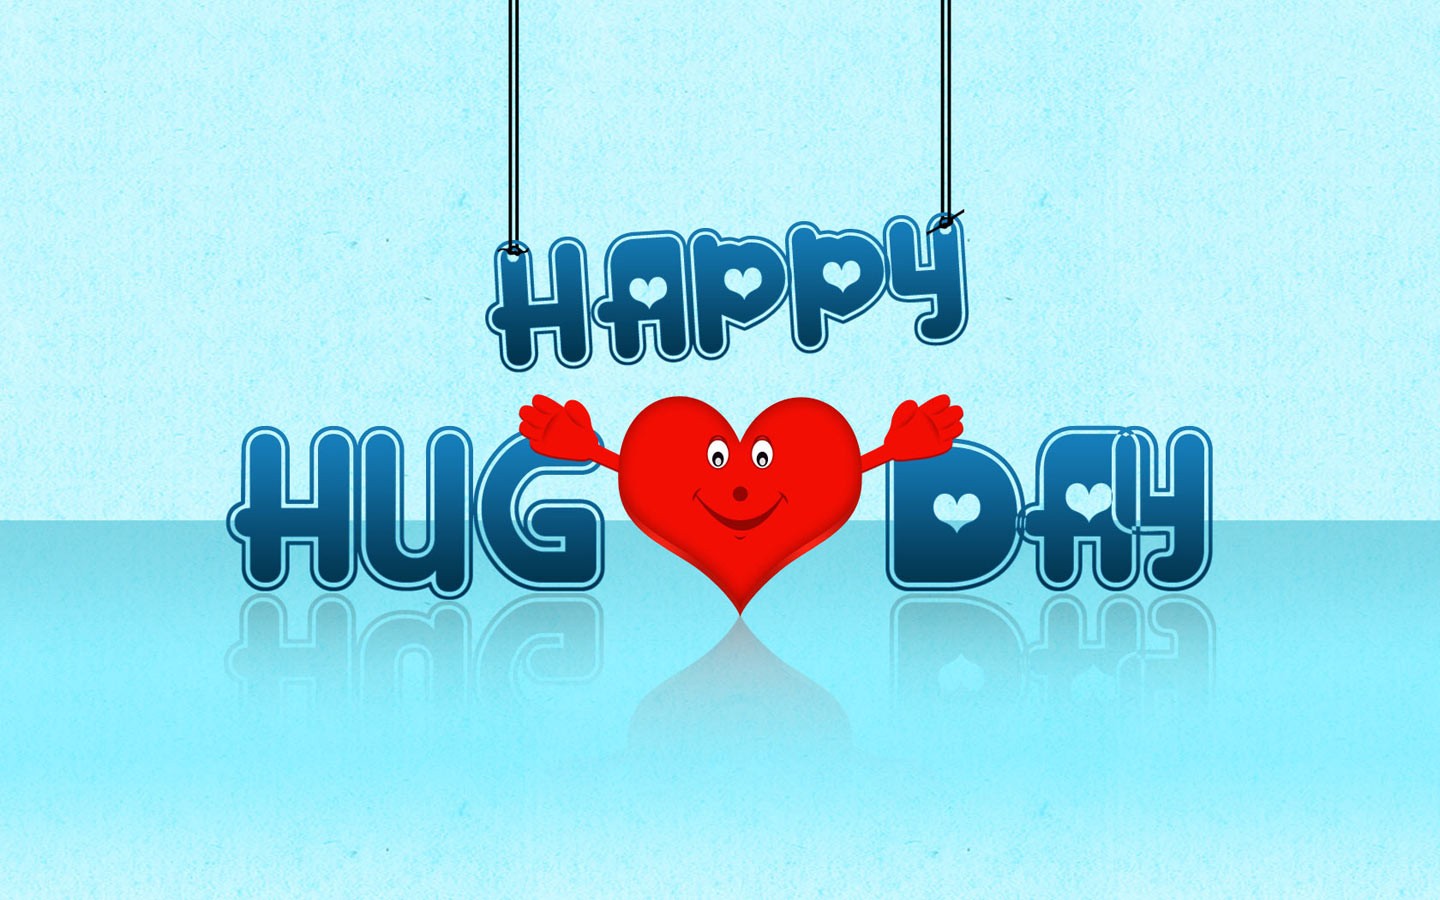 hug day wishes images 